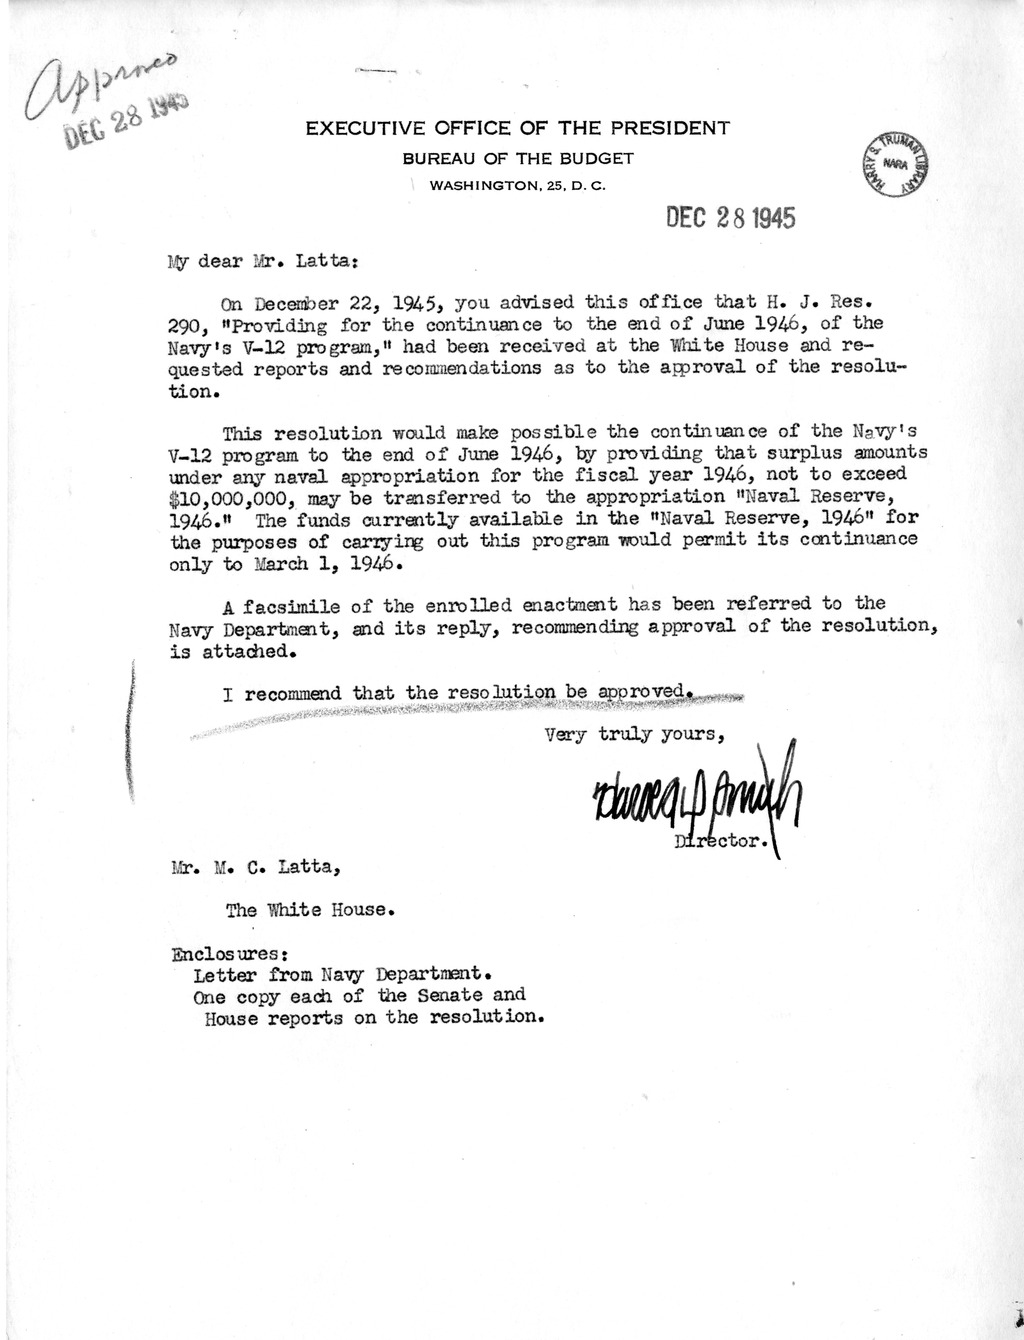 Memorandum from Harold D. Smith to M. C. Latta, H.J. Res. 290, Providing for the Continuance to the End of June 1946, of the Navy's V-12 Program , with Attachments